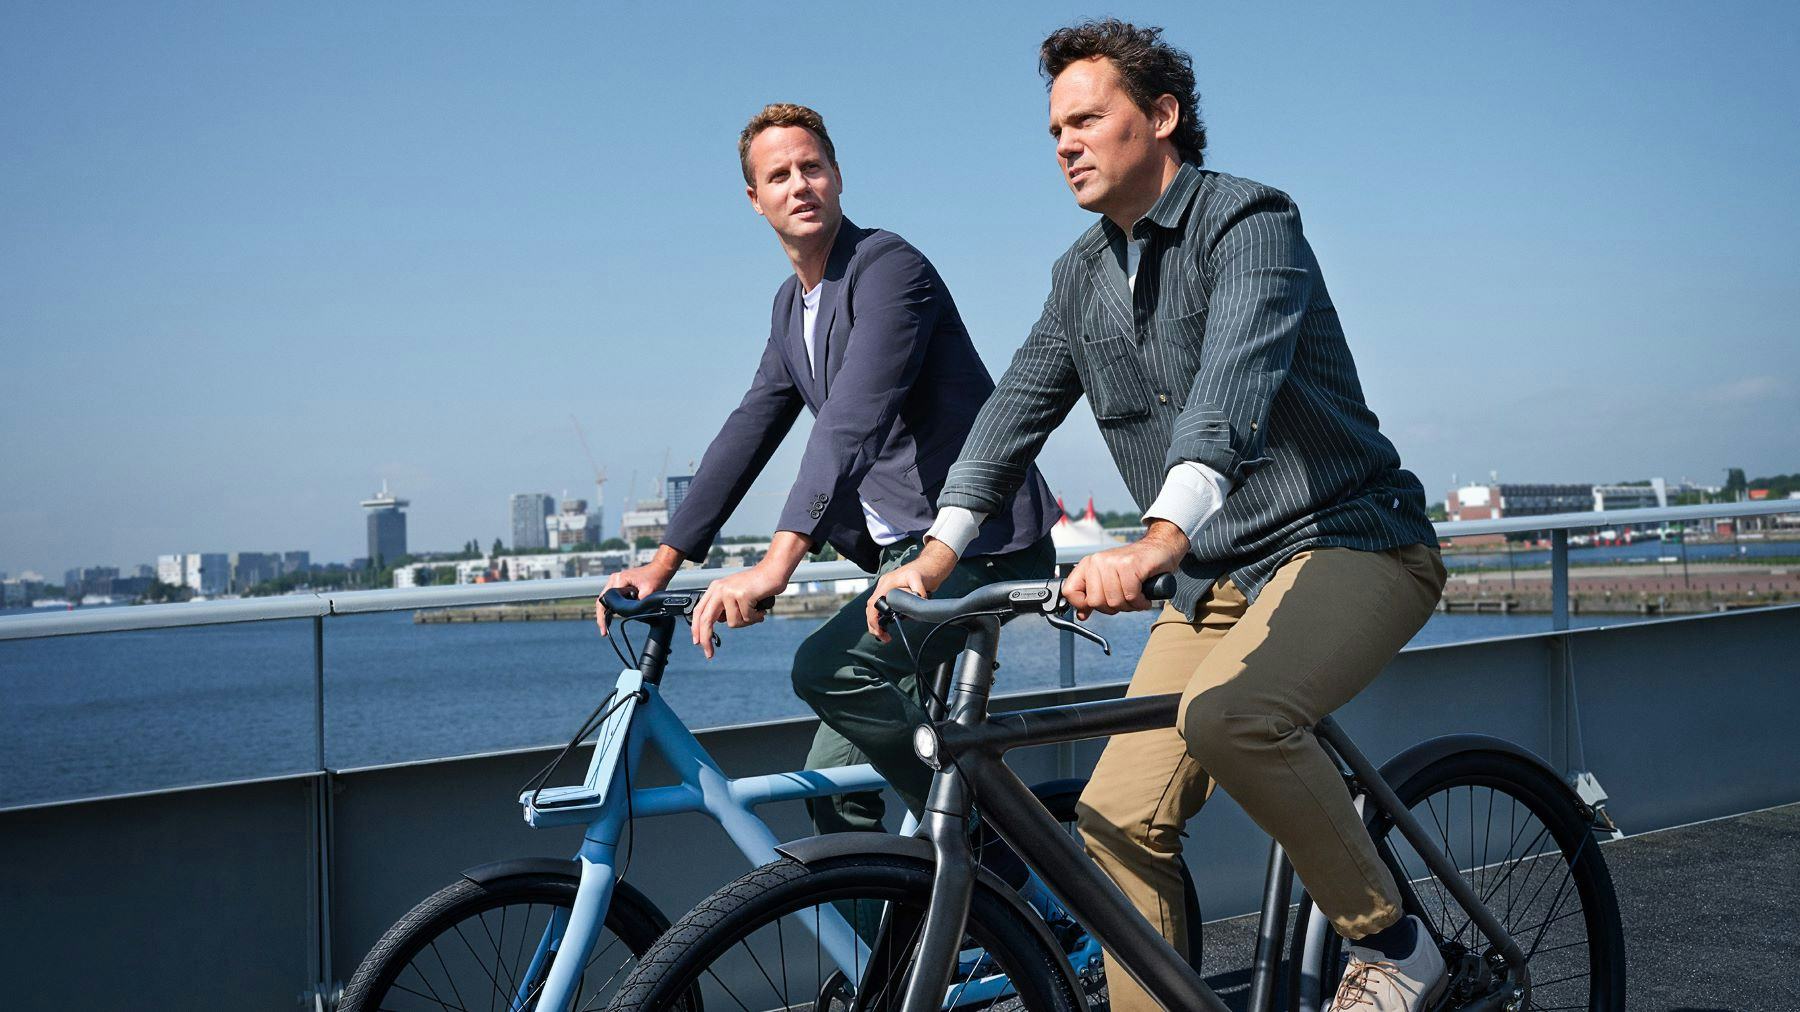 Ties (left) and Taco Carlier, the founders and owners of the VanMoof brand. - Photo Jan Schaeferbrug